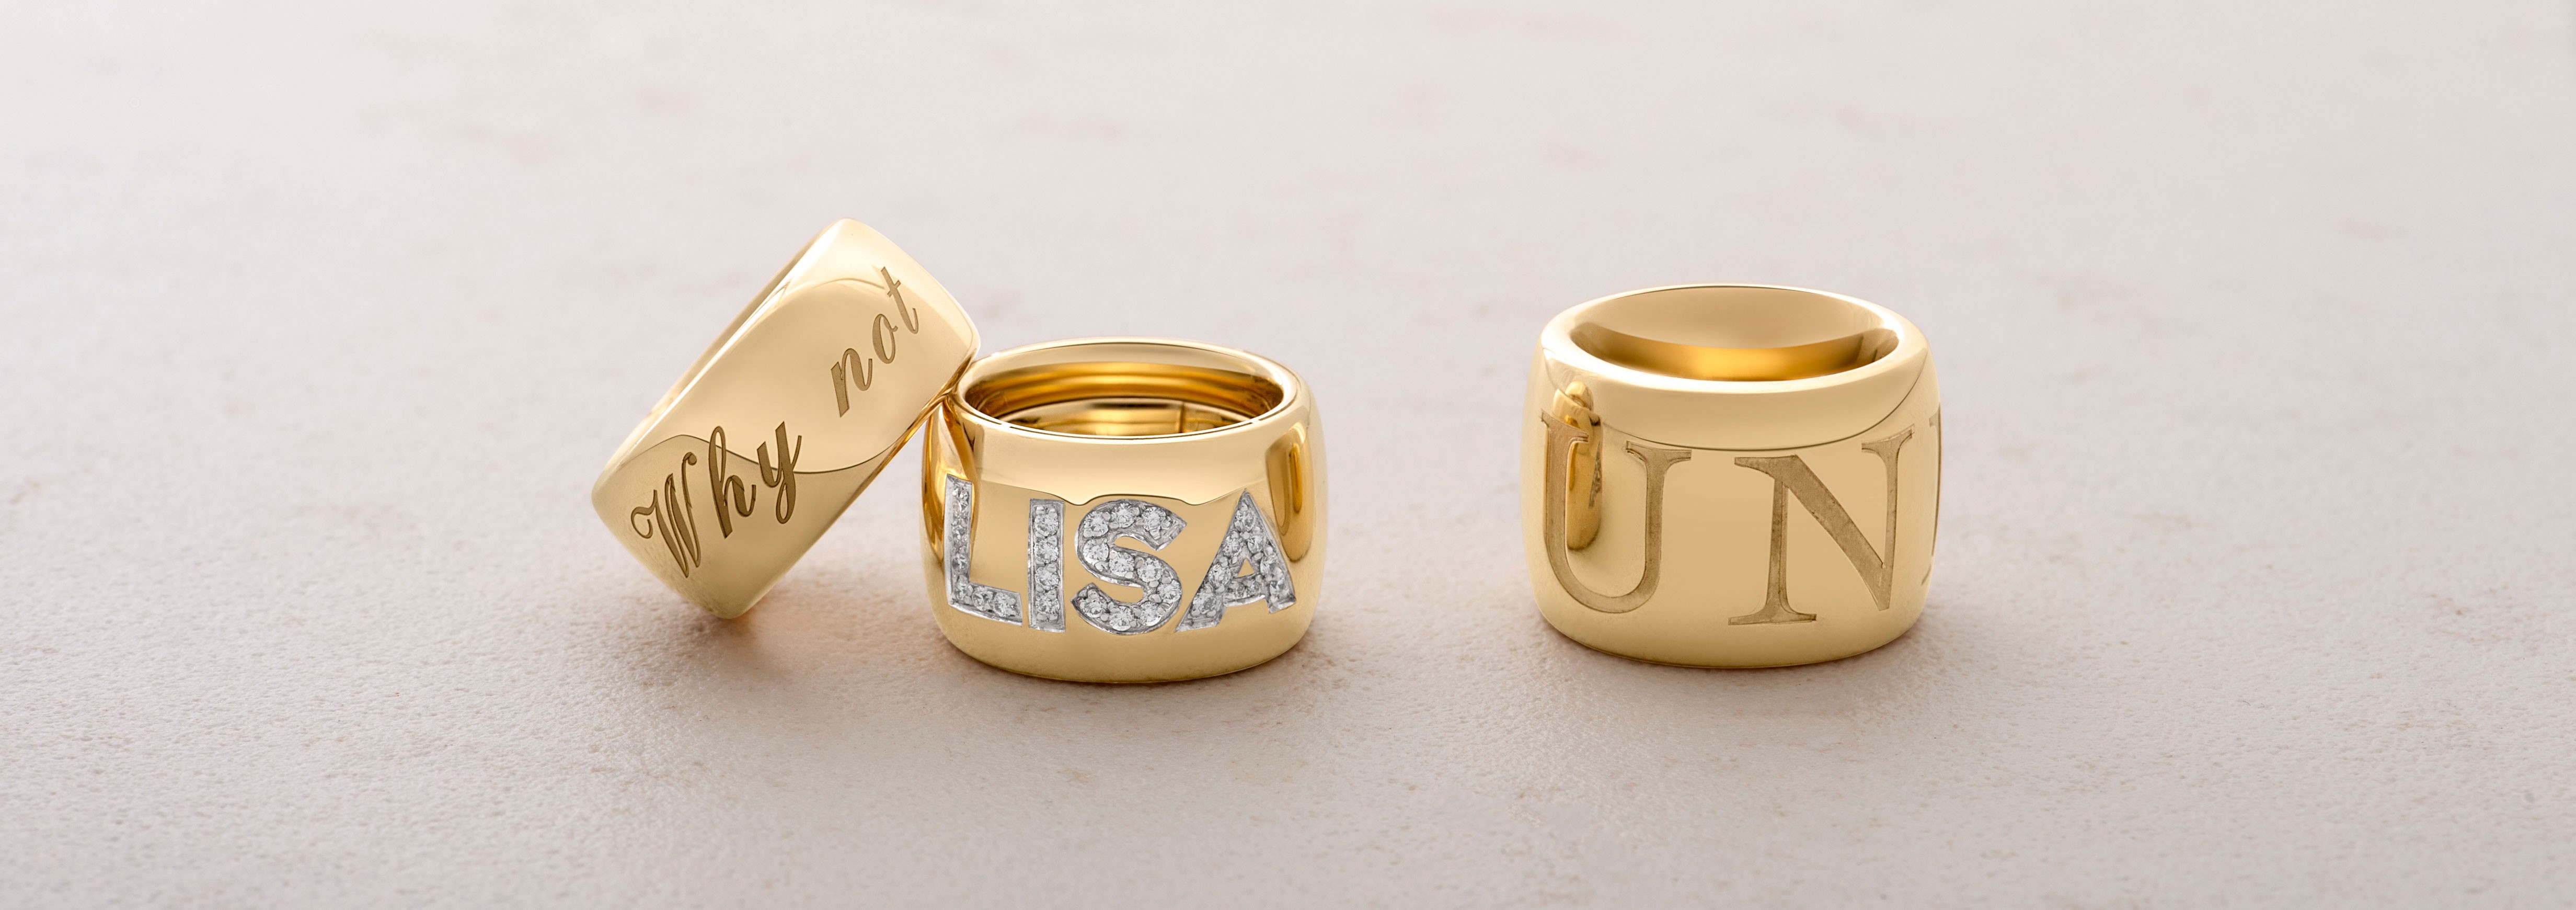 Customizable rings with engraving or diamond letters | FOREVER Unico | CHIMENTO